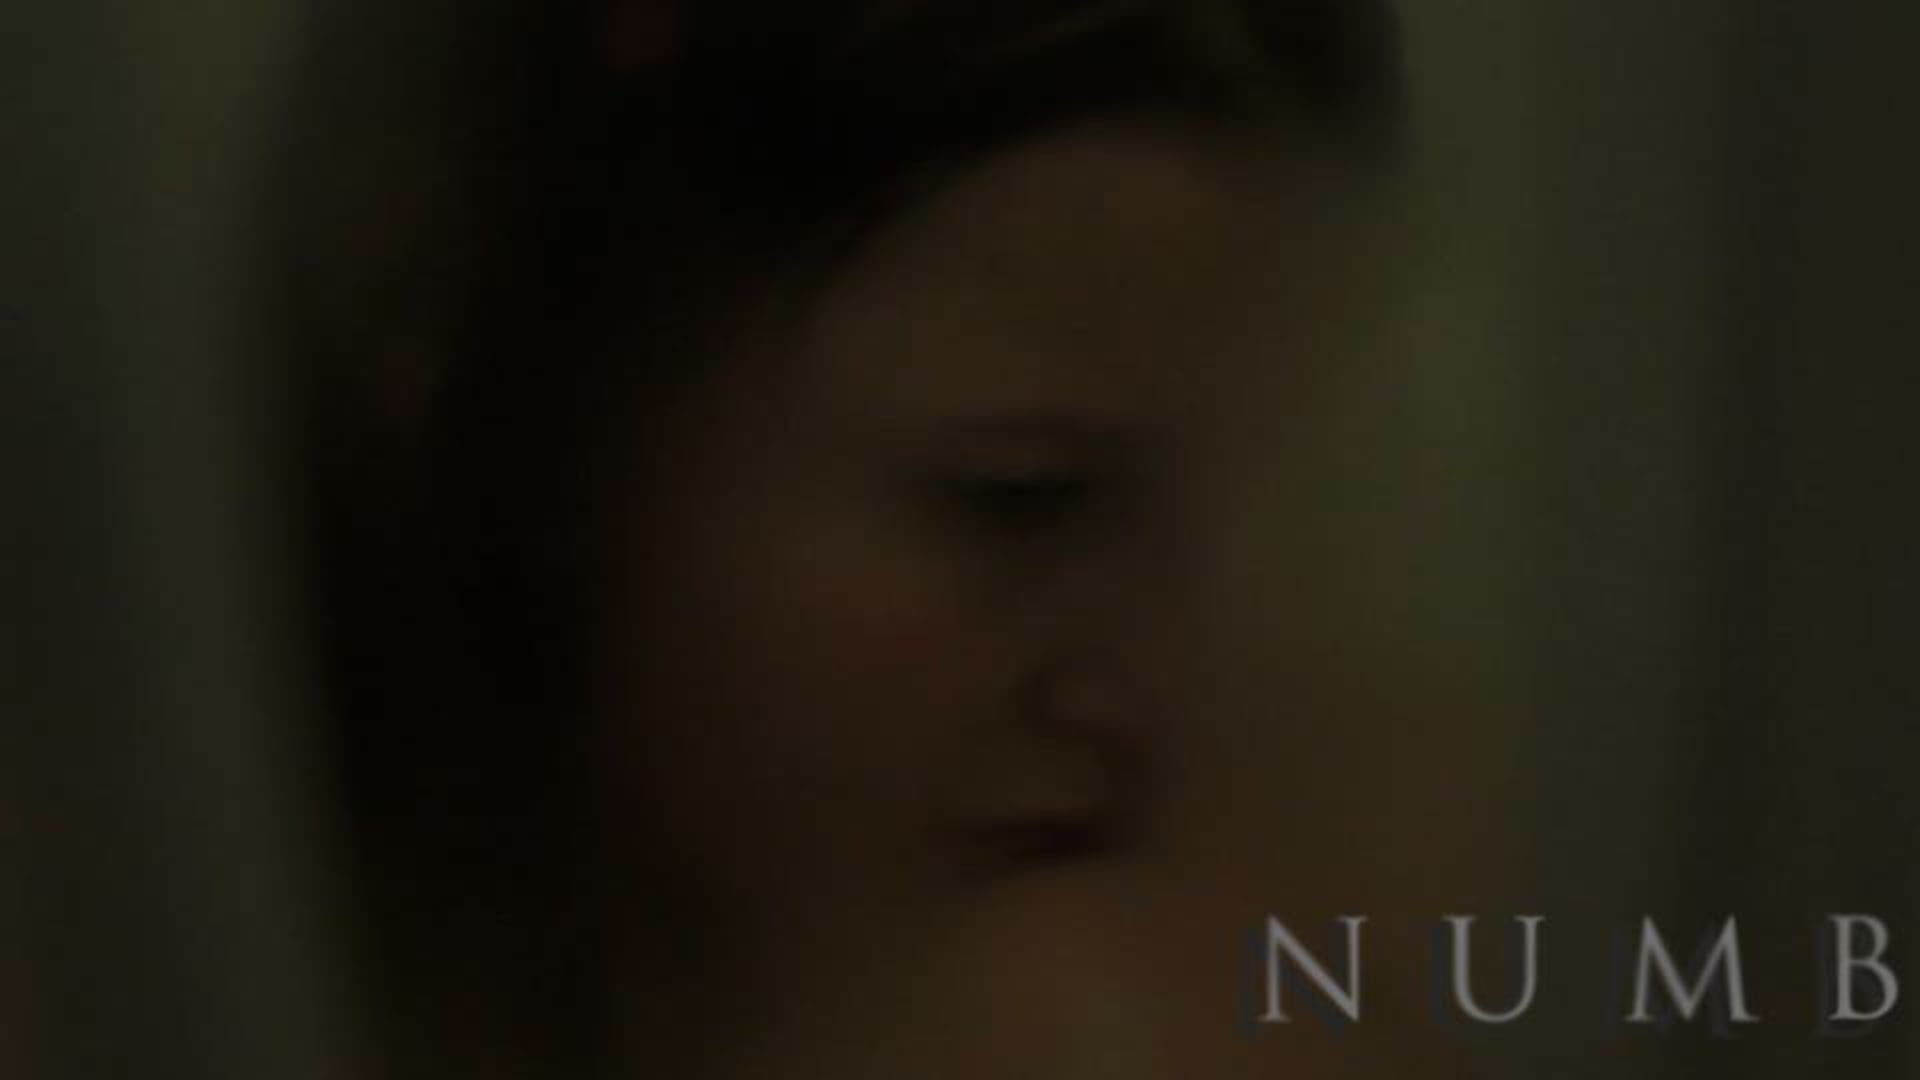 Watch Numb on our Free Roku Channel